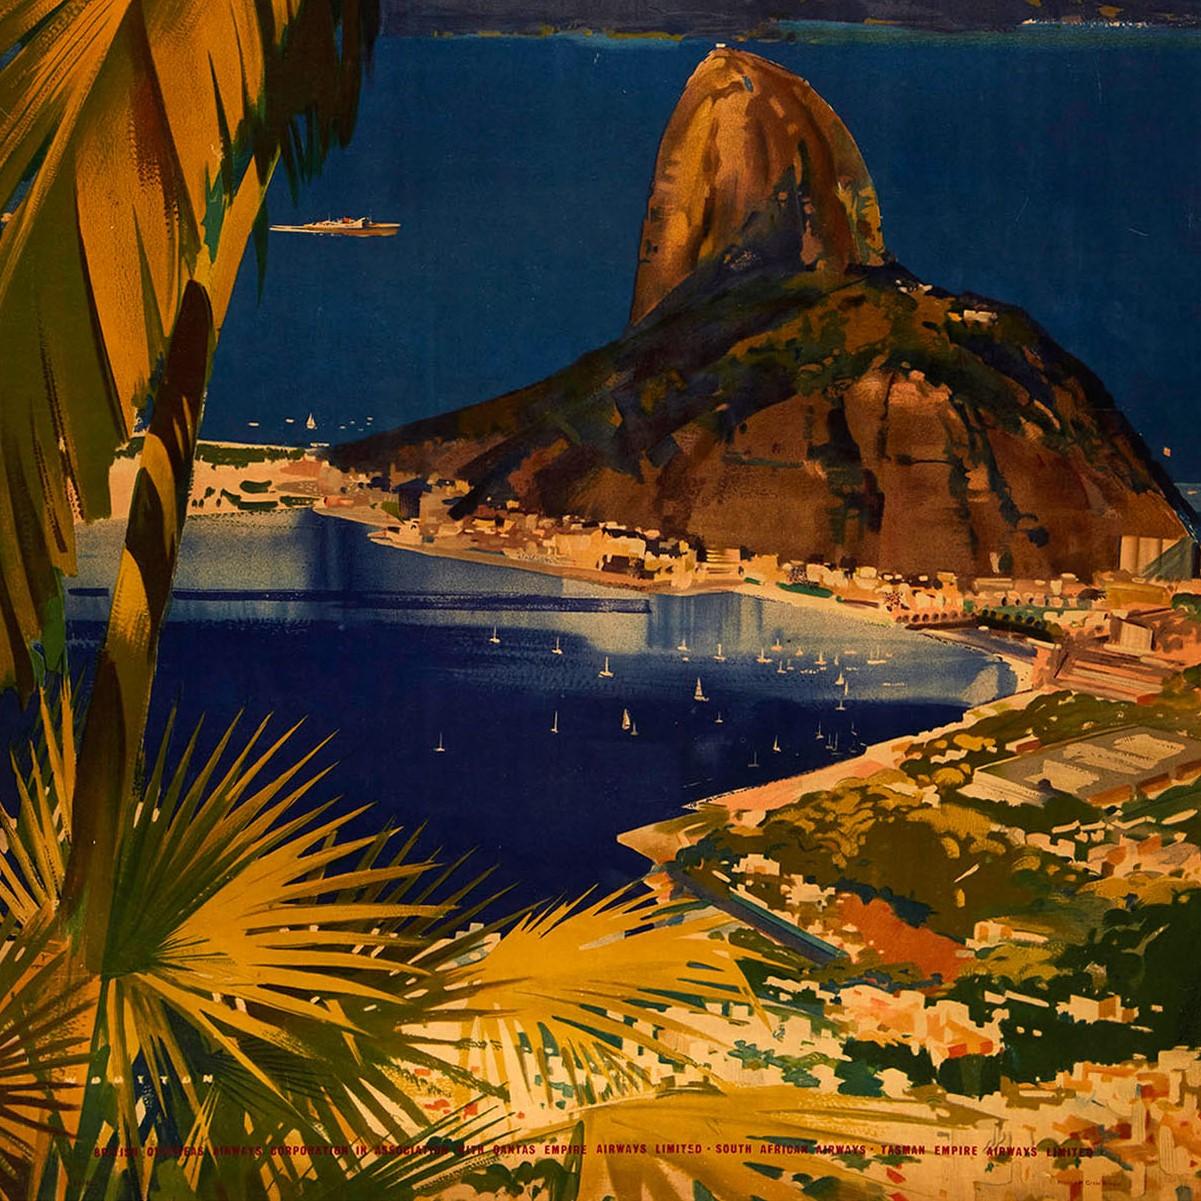 British Original Vintage Poster Fly To South America By BOAC Airline Travel Rio Brazil